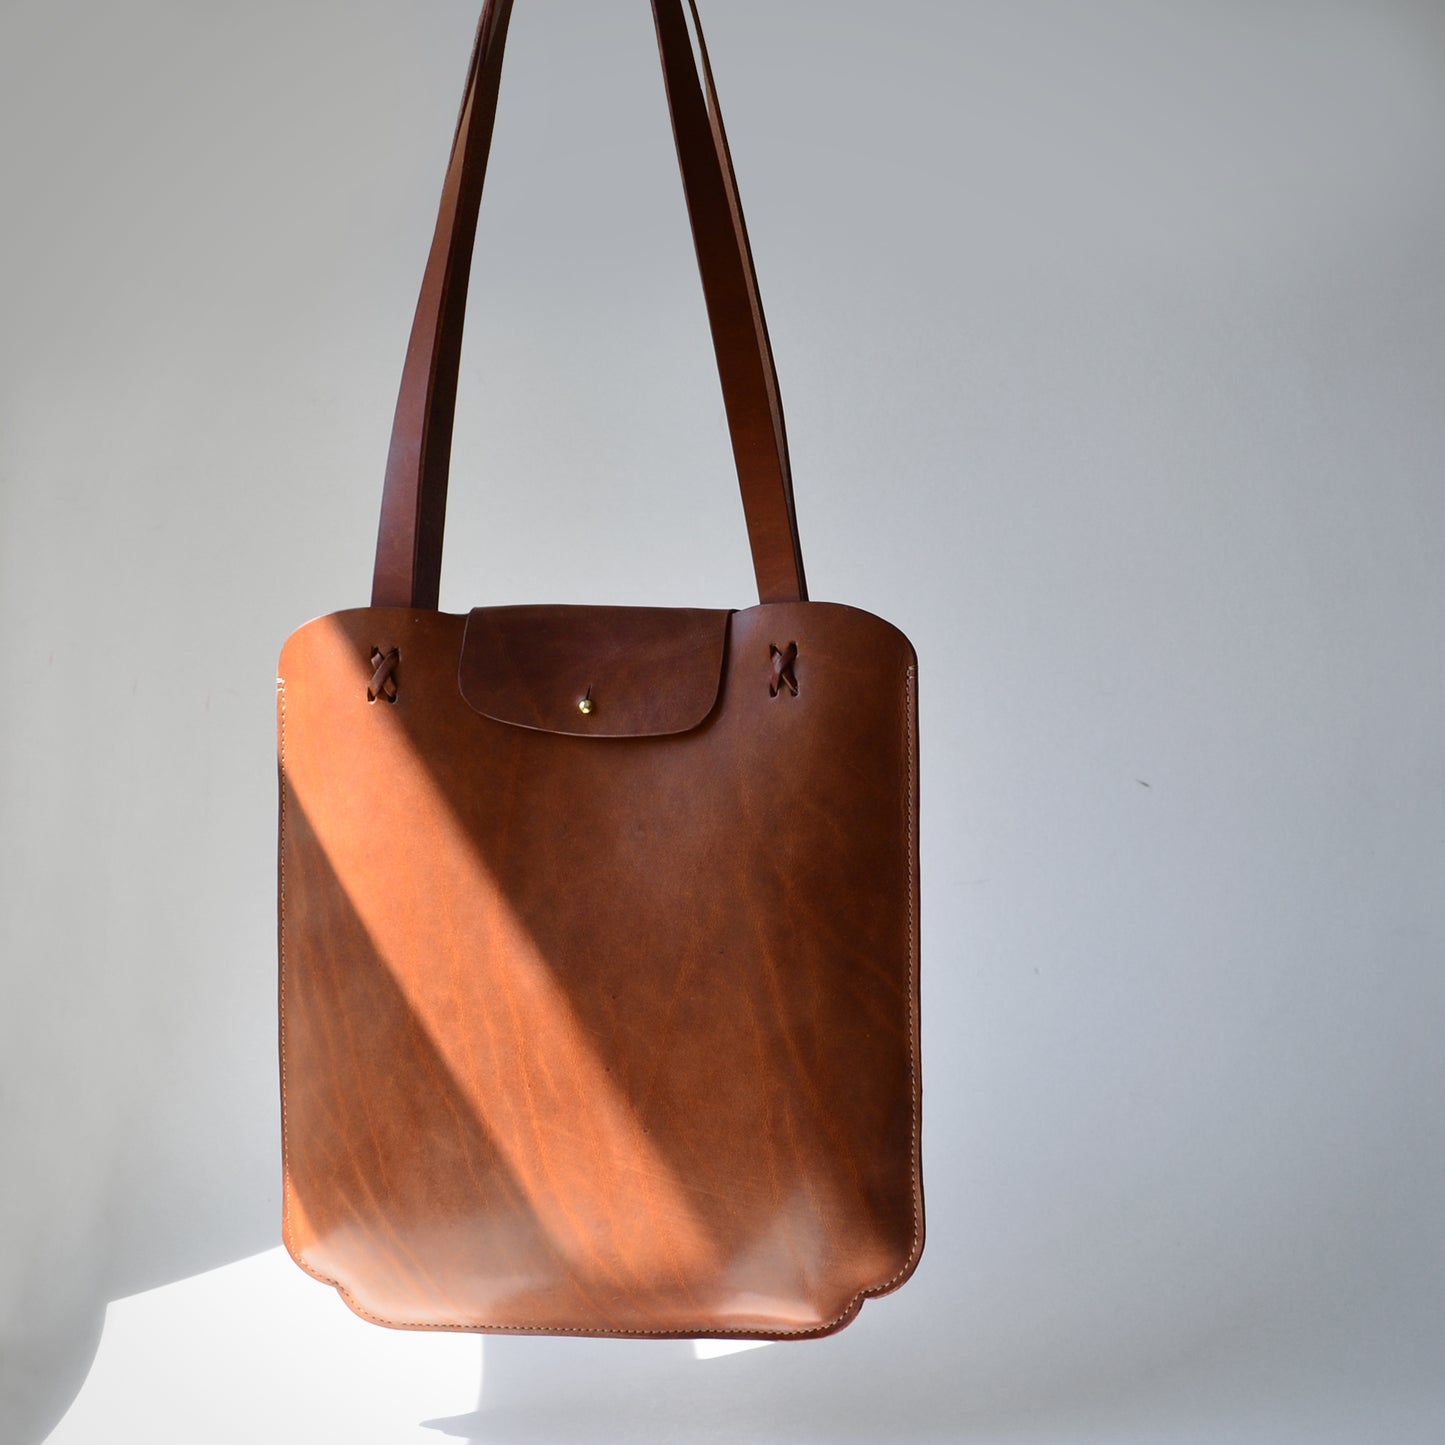 Scalloped Slim tote bag product image. Caramel color leather bag in sunlight stream.